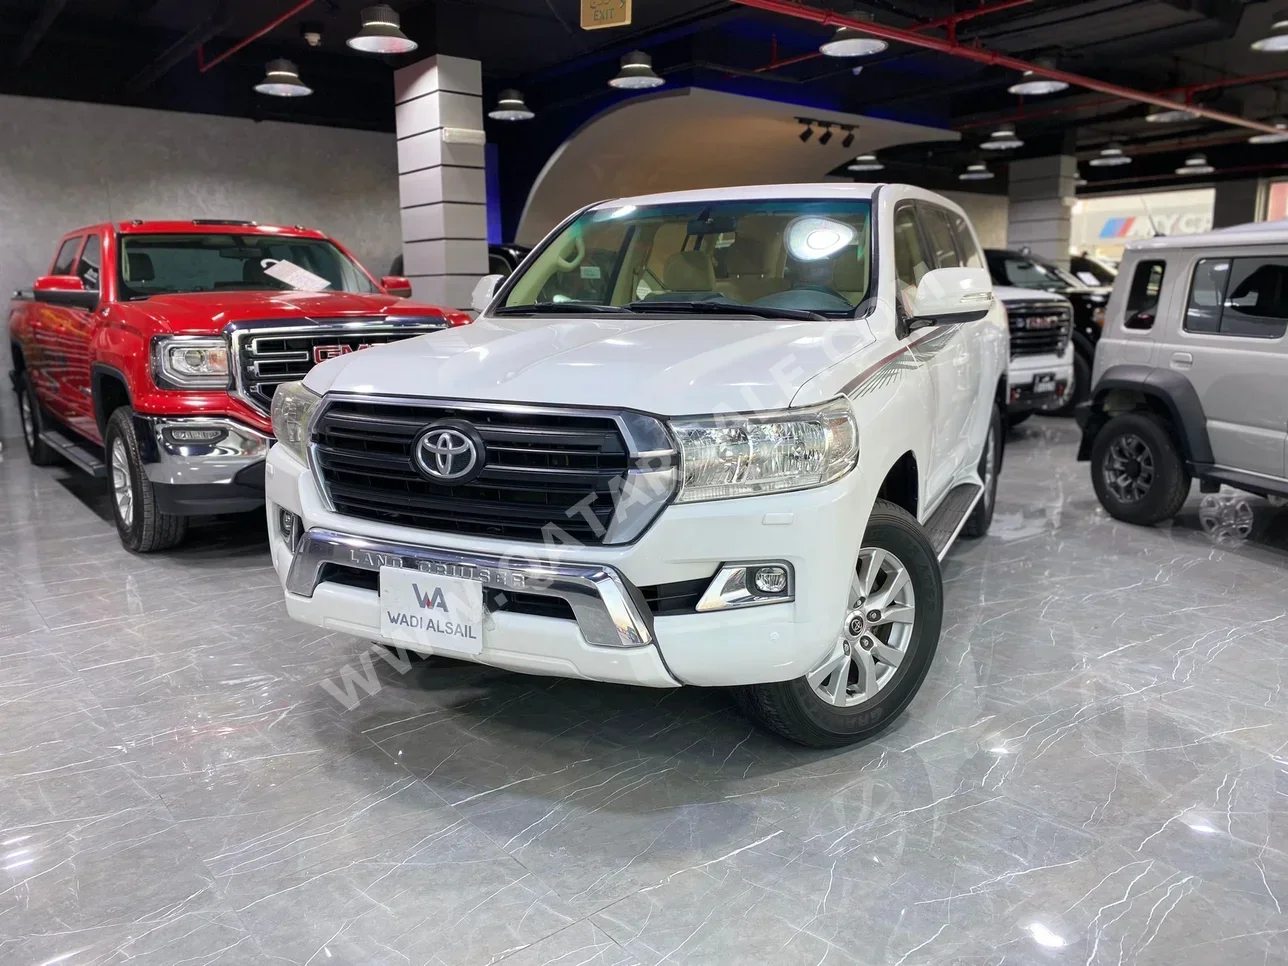 Toyota  Land Cruiser  G  2016  Automatic  260,000 Km  6 Cylinder  Four Wheel Drive (4WD)  SUV  White